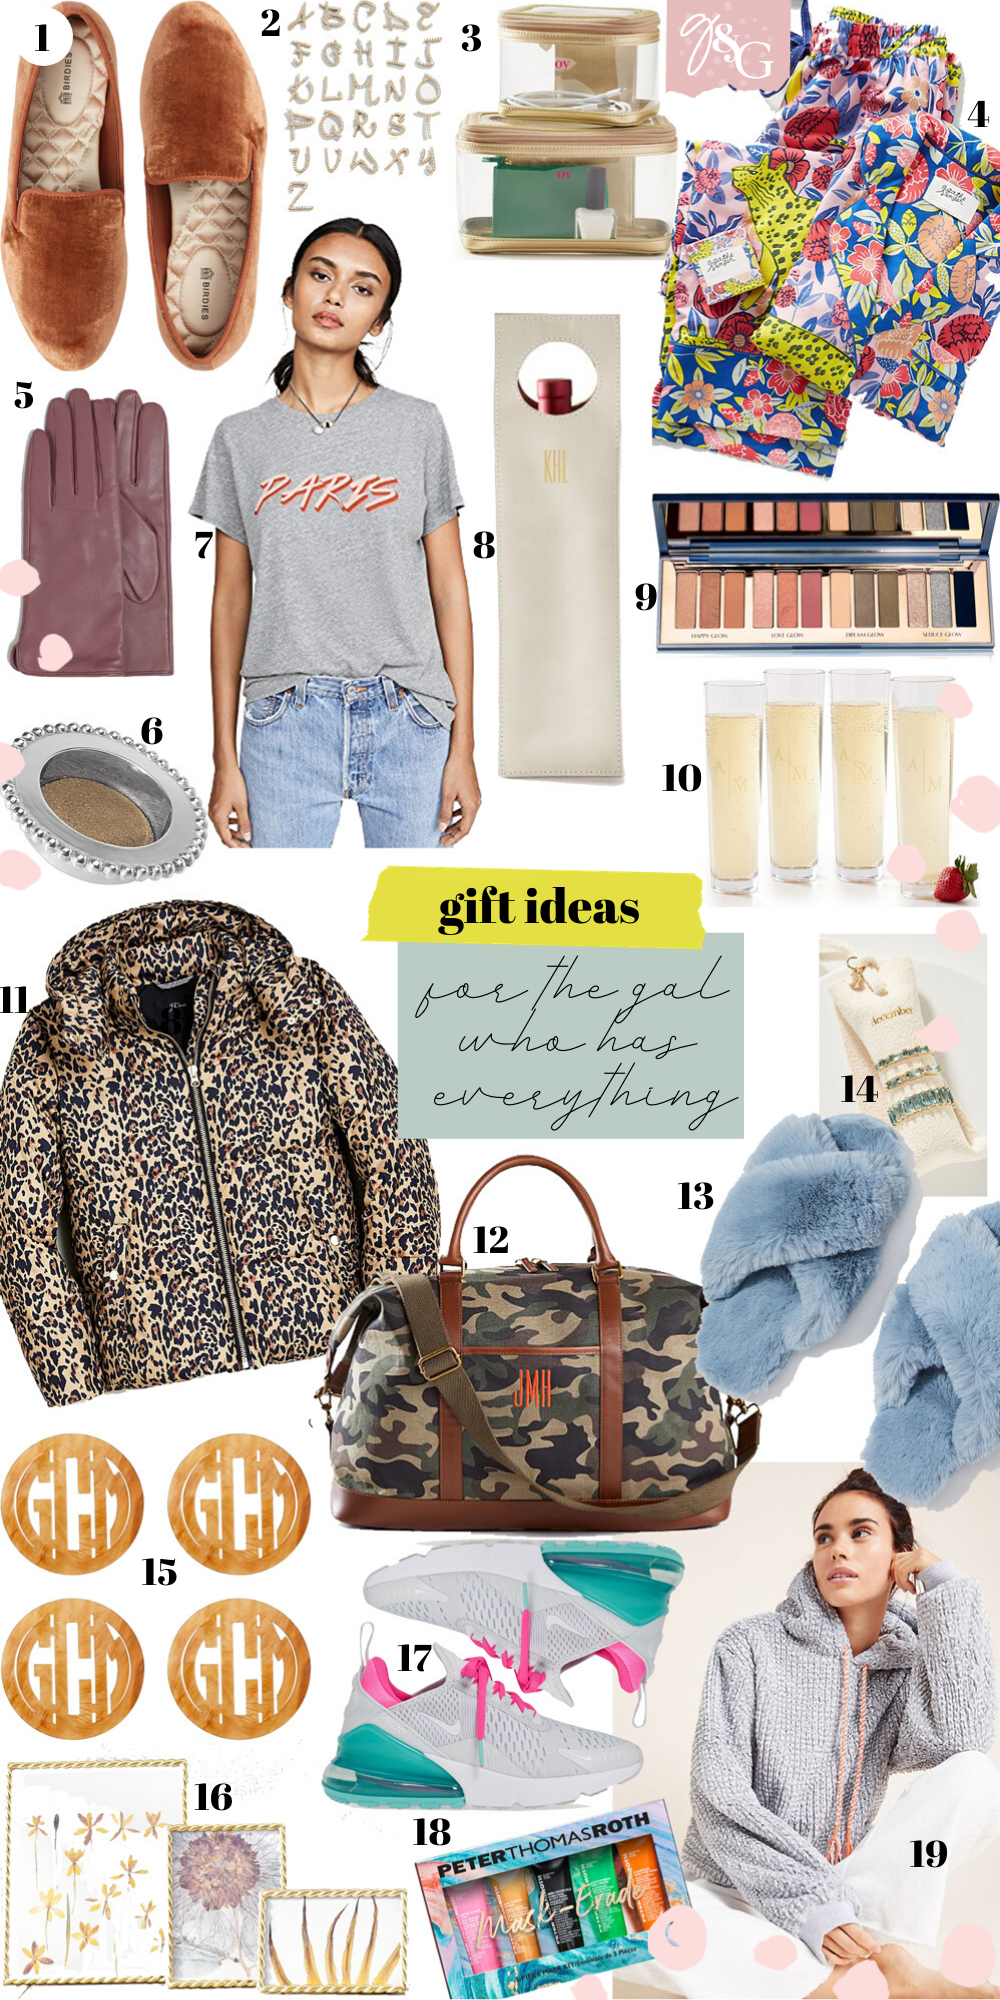 Gift Guide: gift ideas for the girl who has everything - Glitter